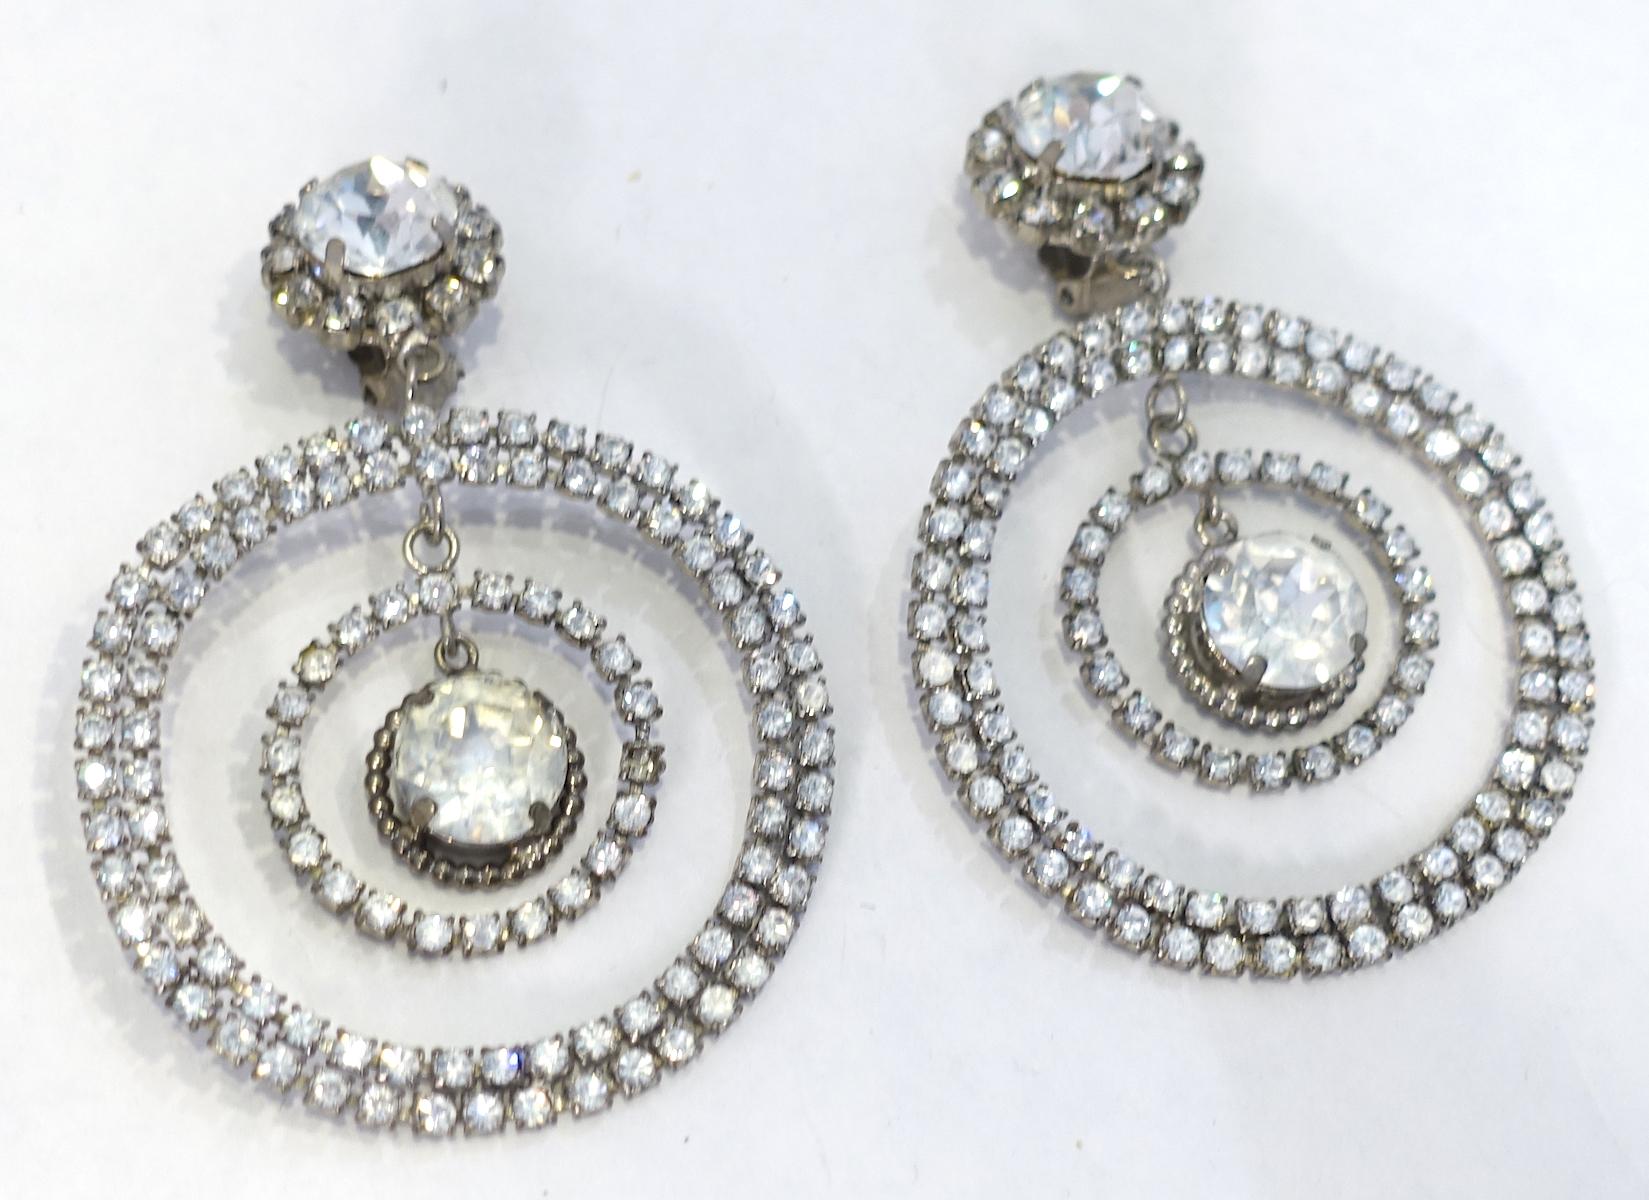 These vintage signed Chanel earrings have clear crystals in a double hoop design with a dangling crystal in the center. It is made in a silver tone metal setting.  These clip earrings measure 3-1/2” x 2-1/2” and are signed “Chanel 28 Made in